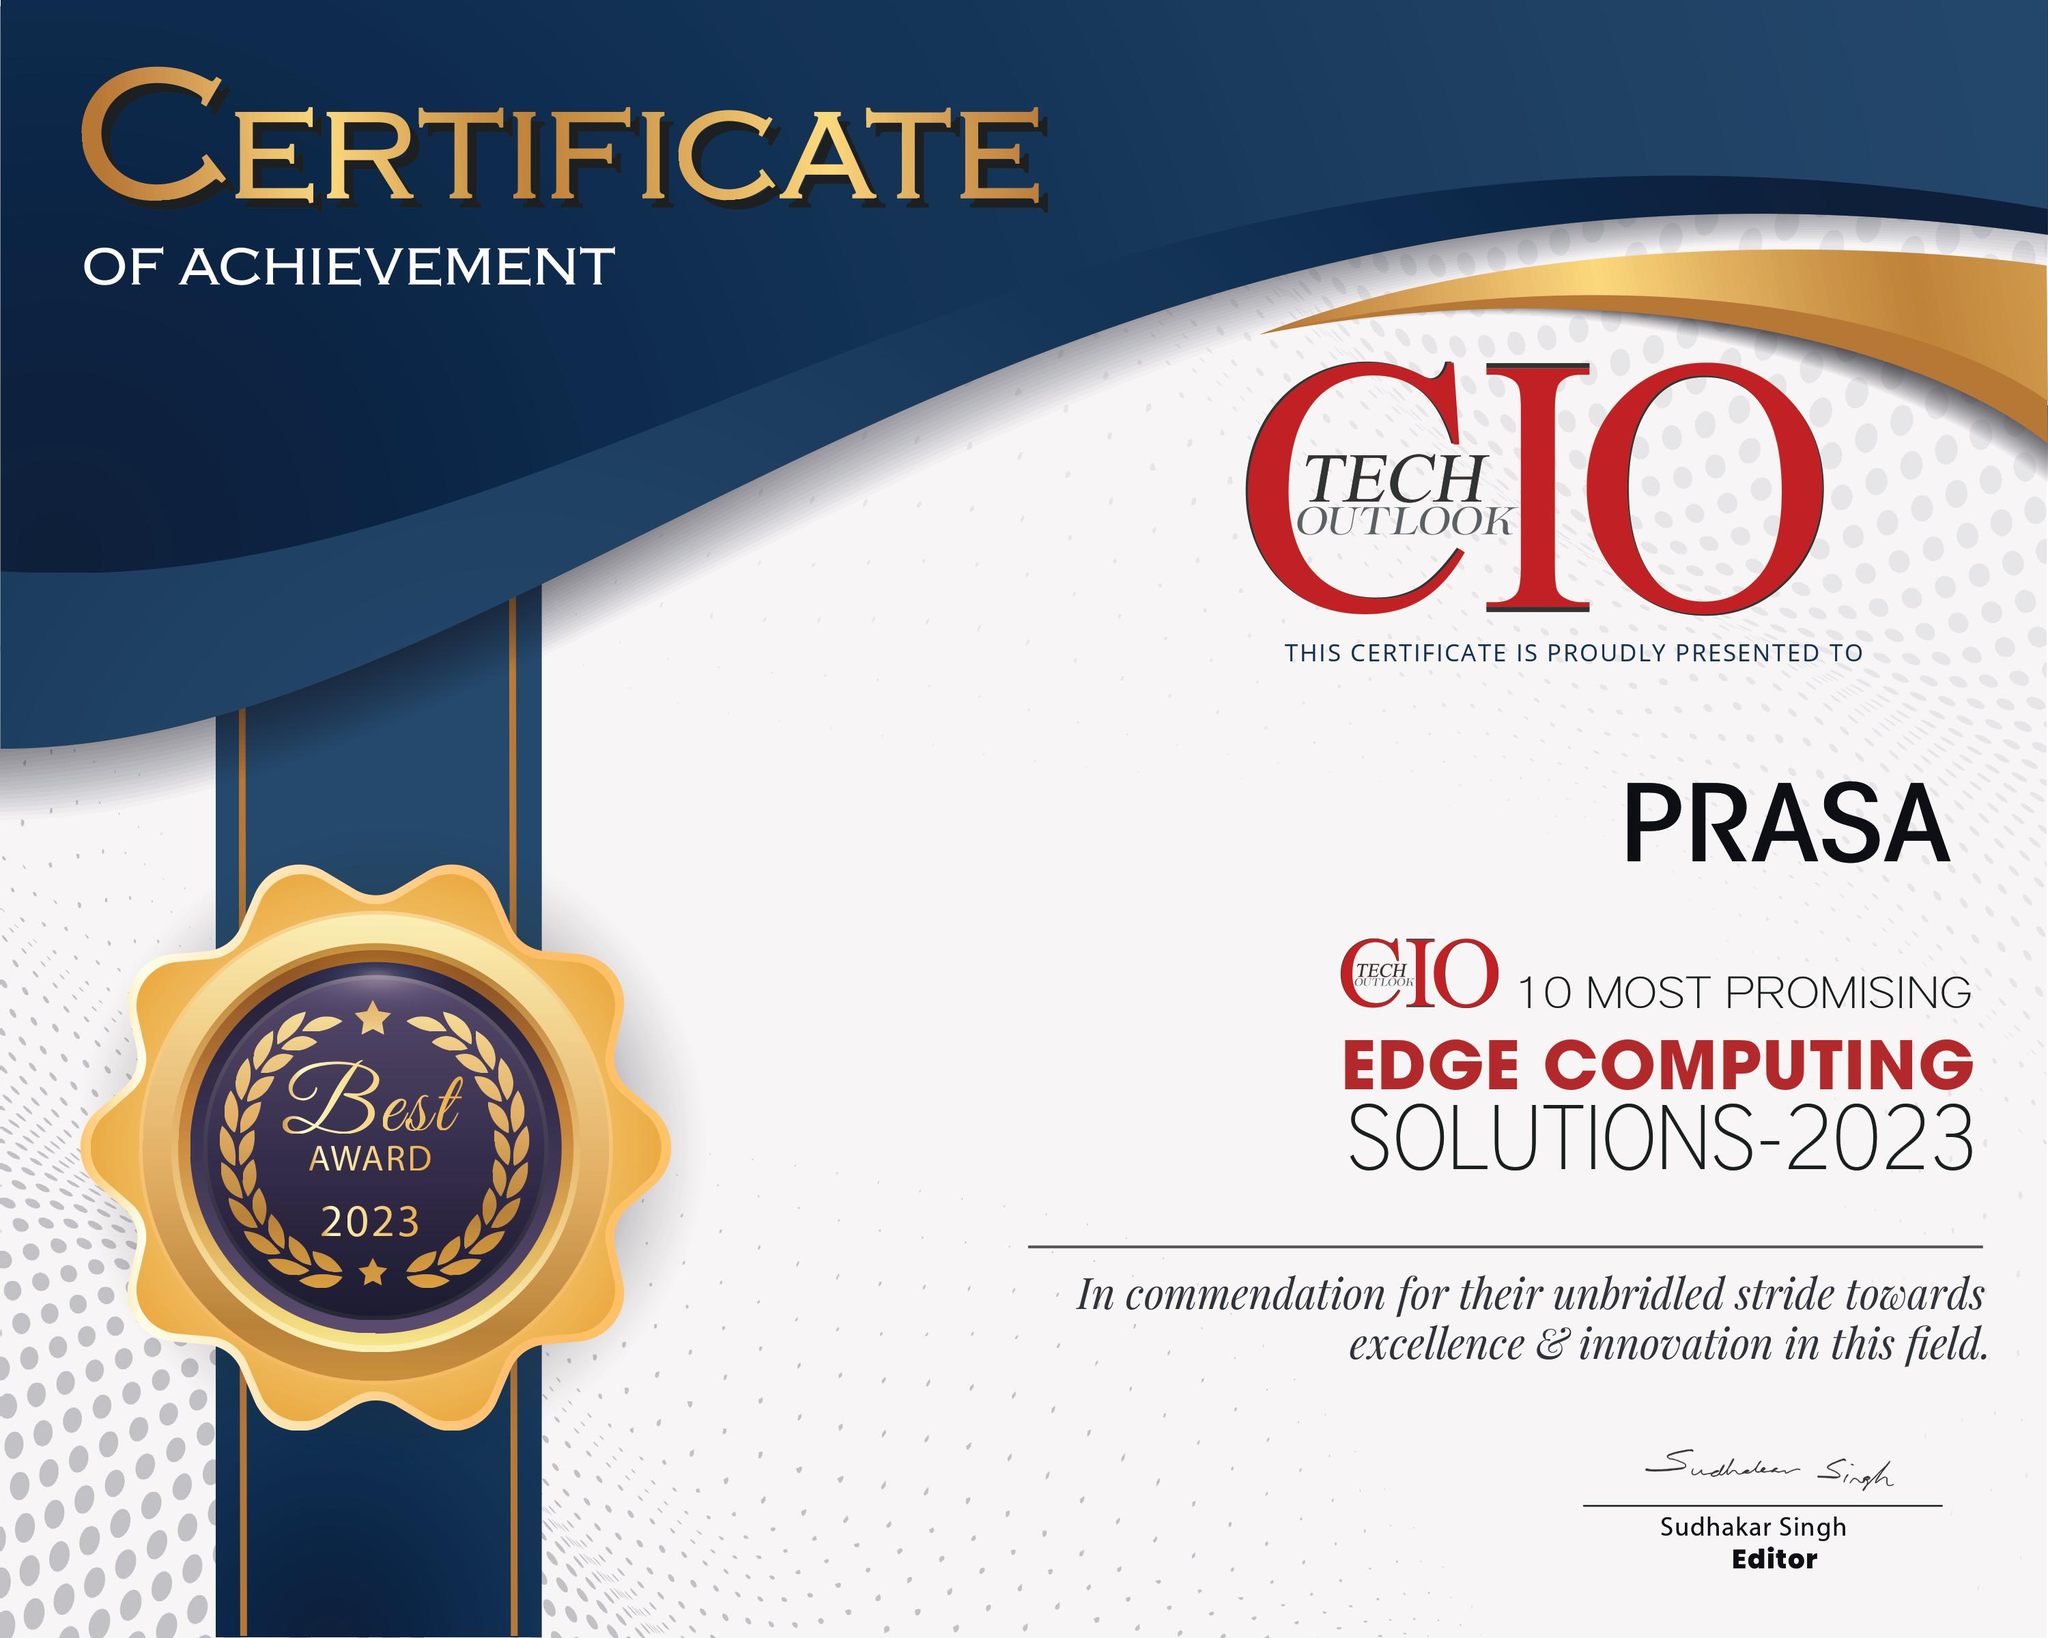 PRASA is shortlisted as one of the 10 Most Promising Edge Computing Solutions Providers in 2023 by CIOTechOutlook